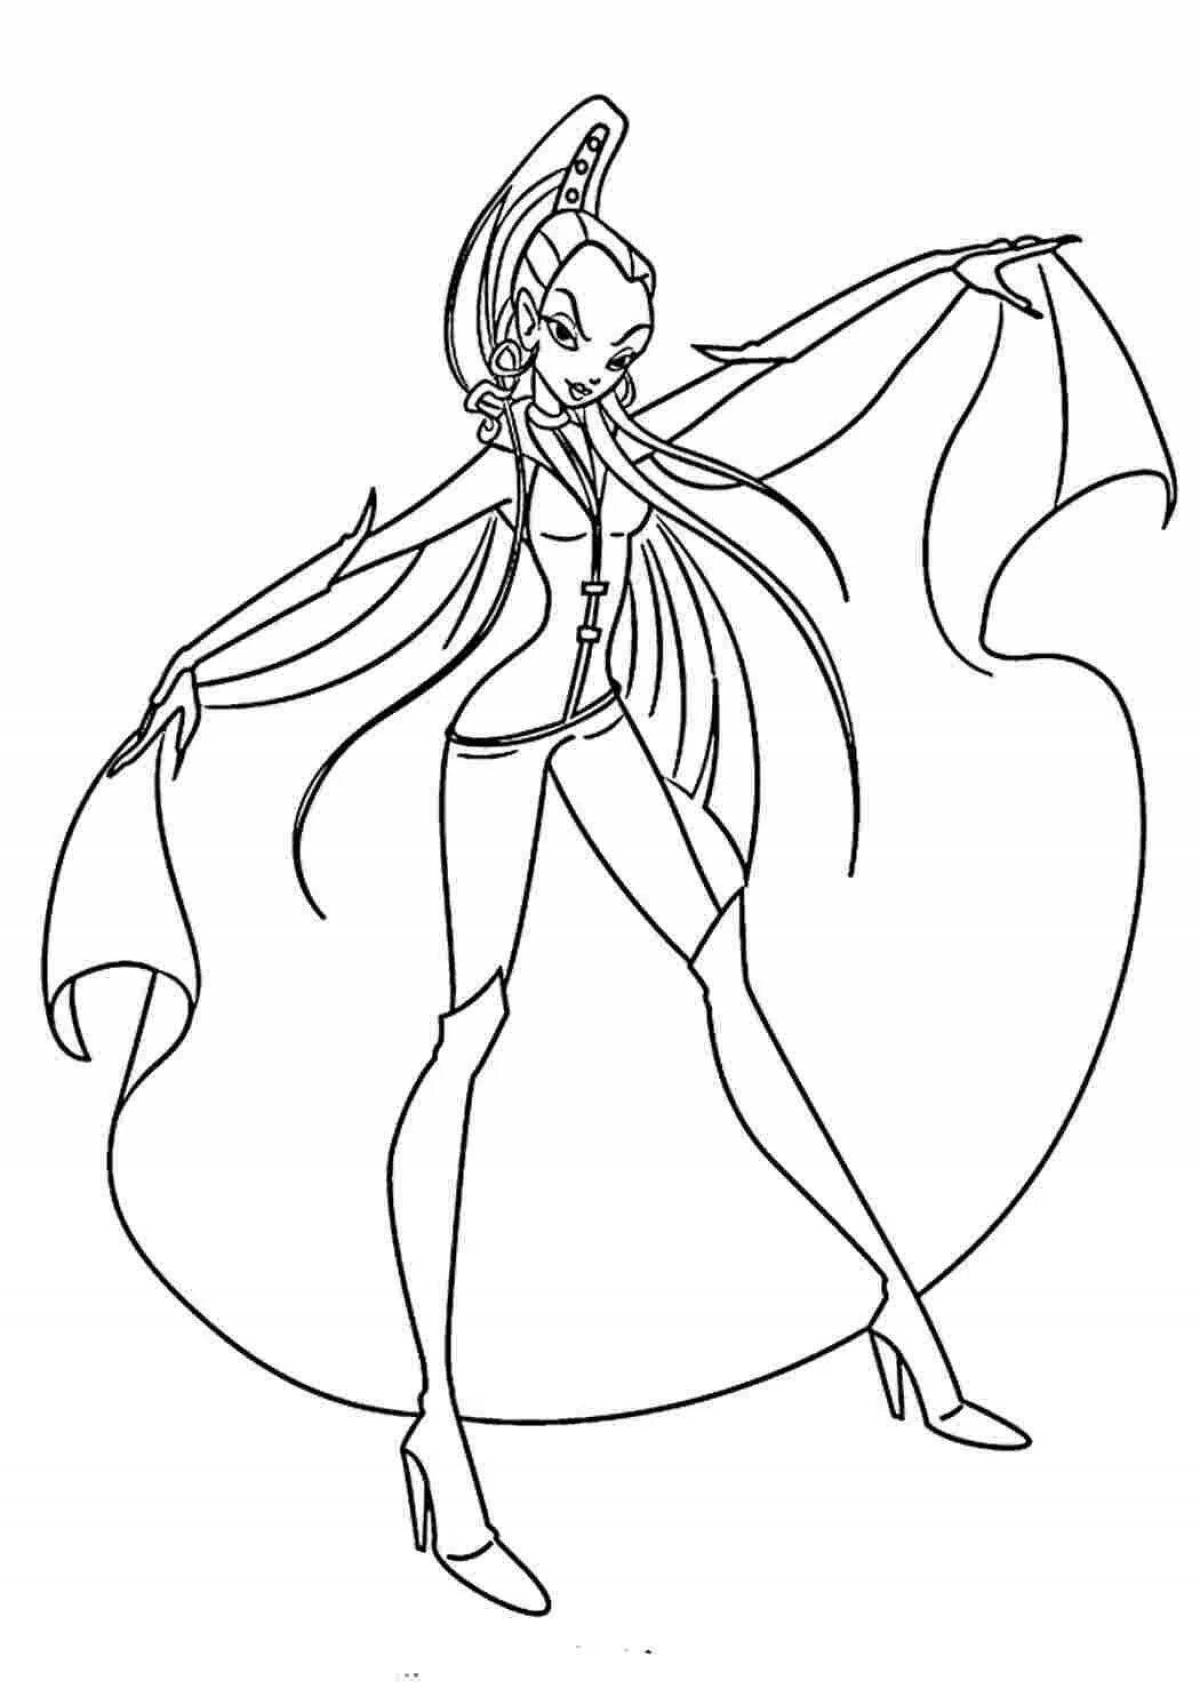 Playful winx trix coloring page